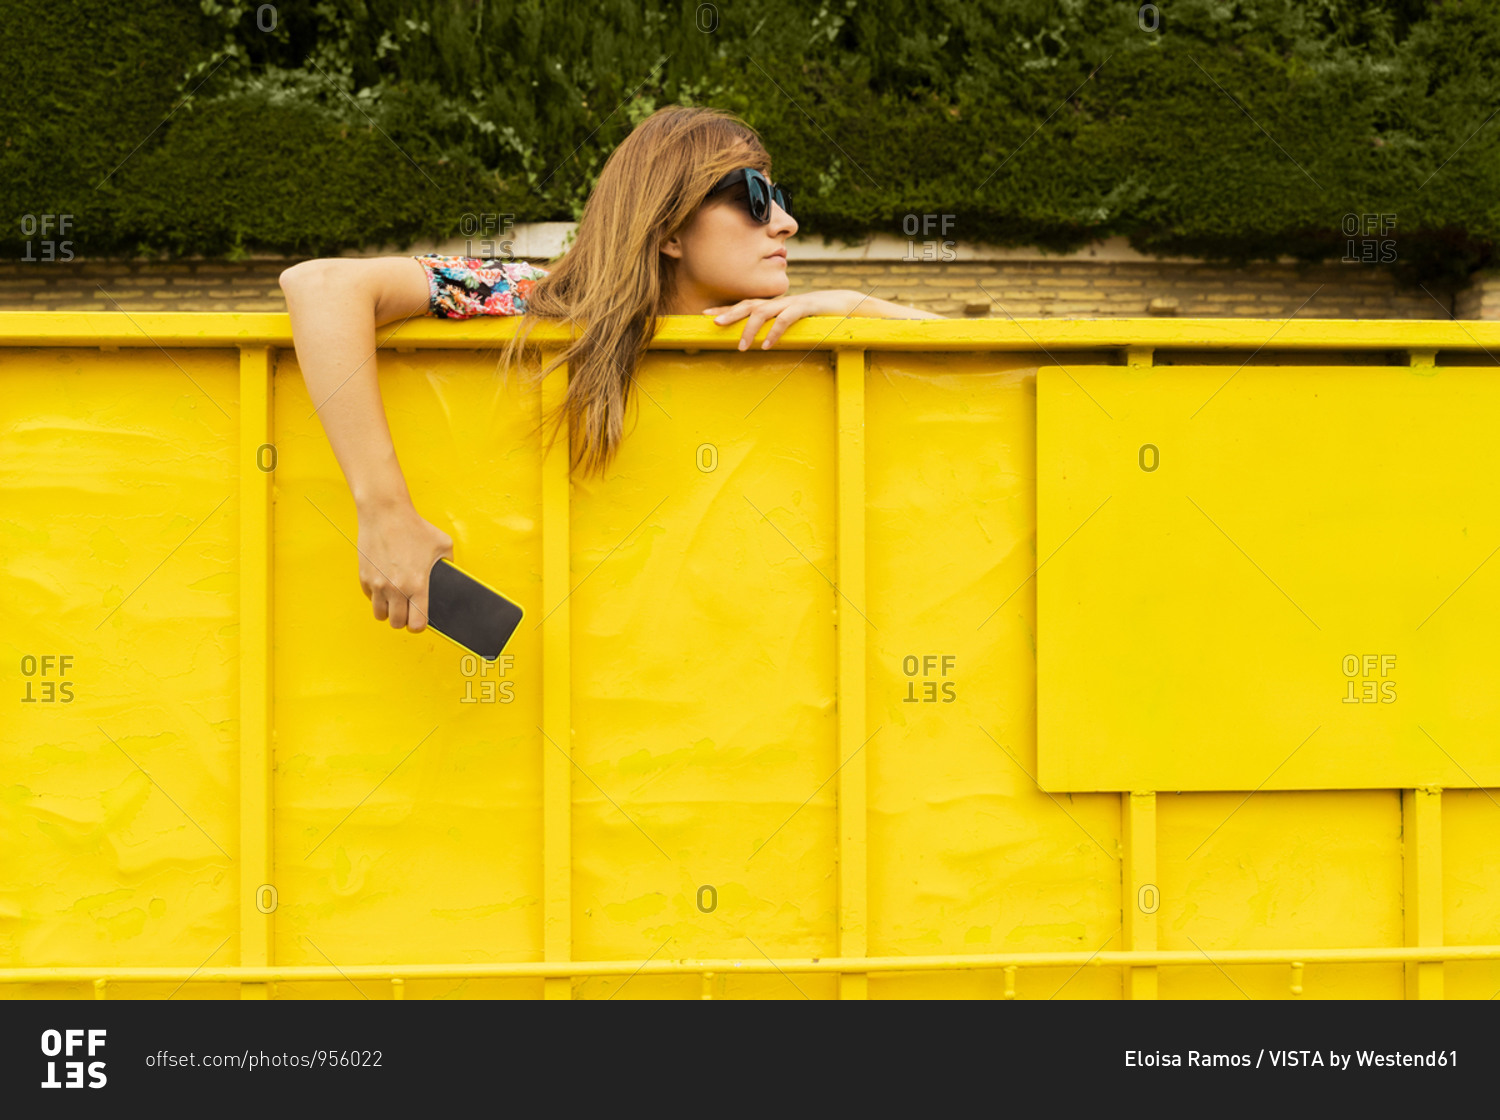 Woman wearing sunglasses- leaning on edge on yellow container- holding smartphone